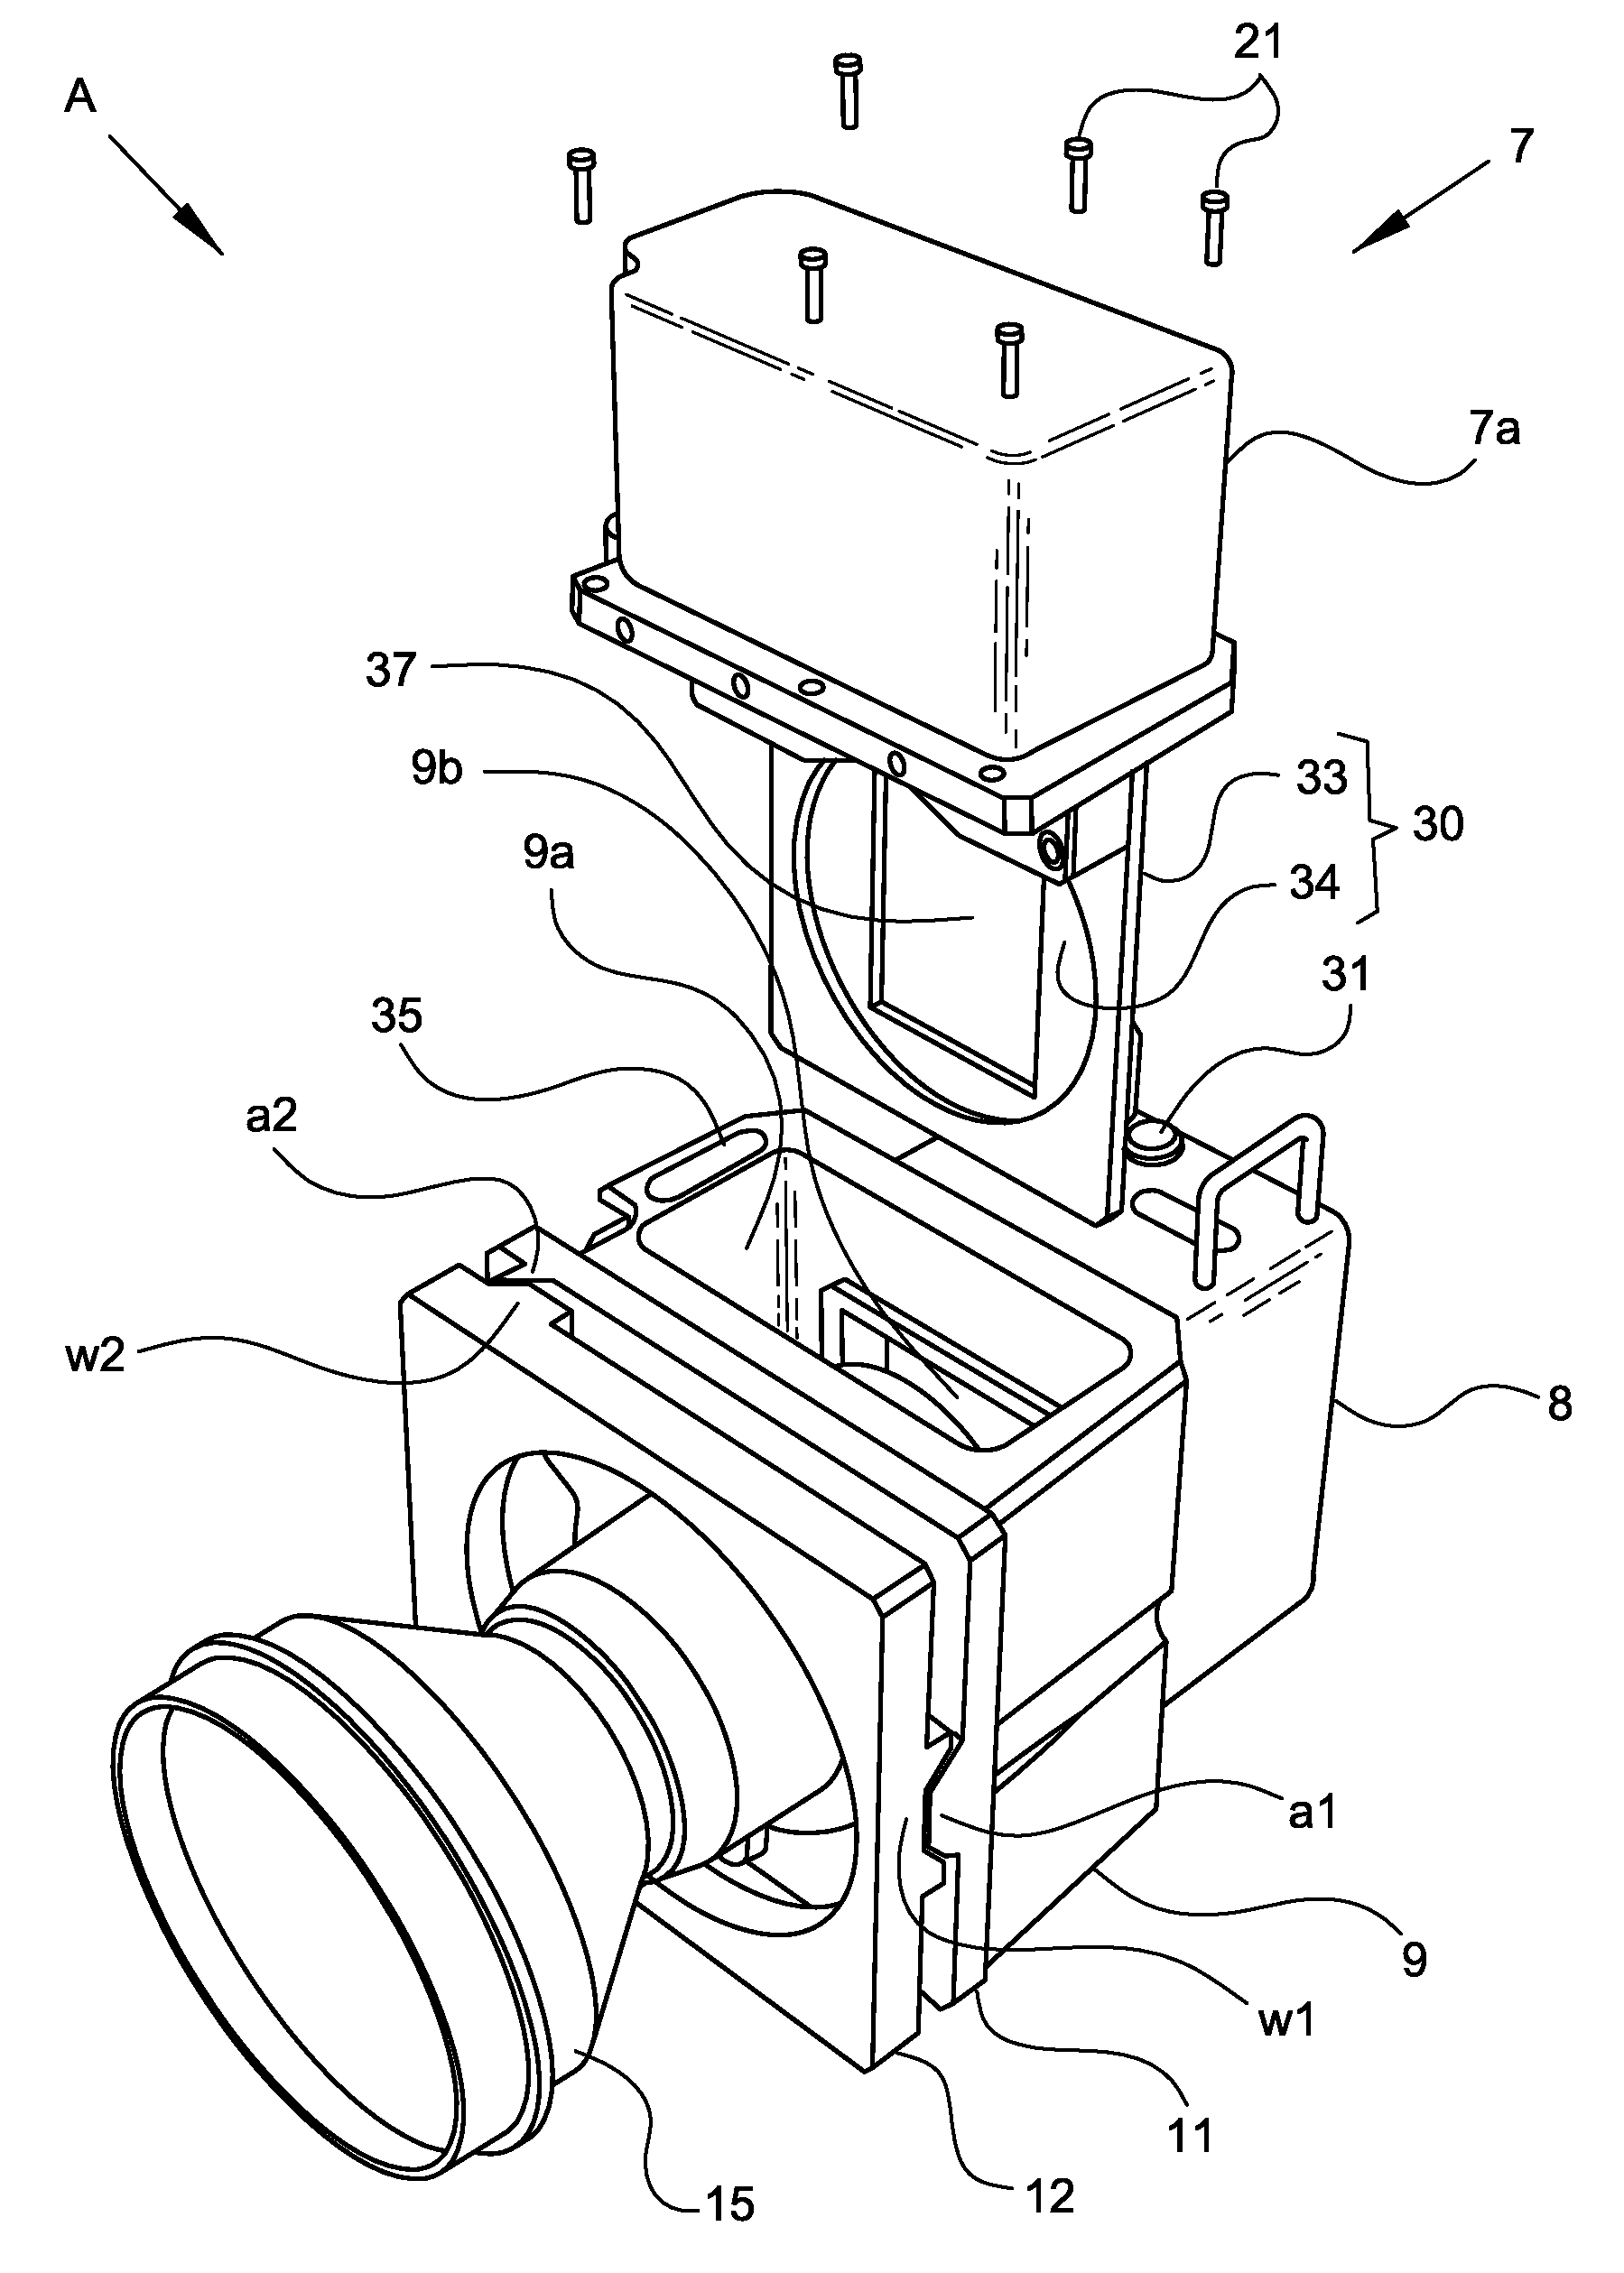 Removable shutter for a camera